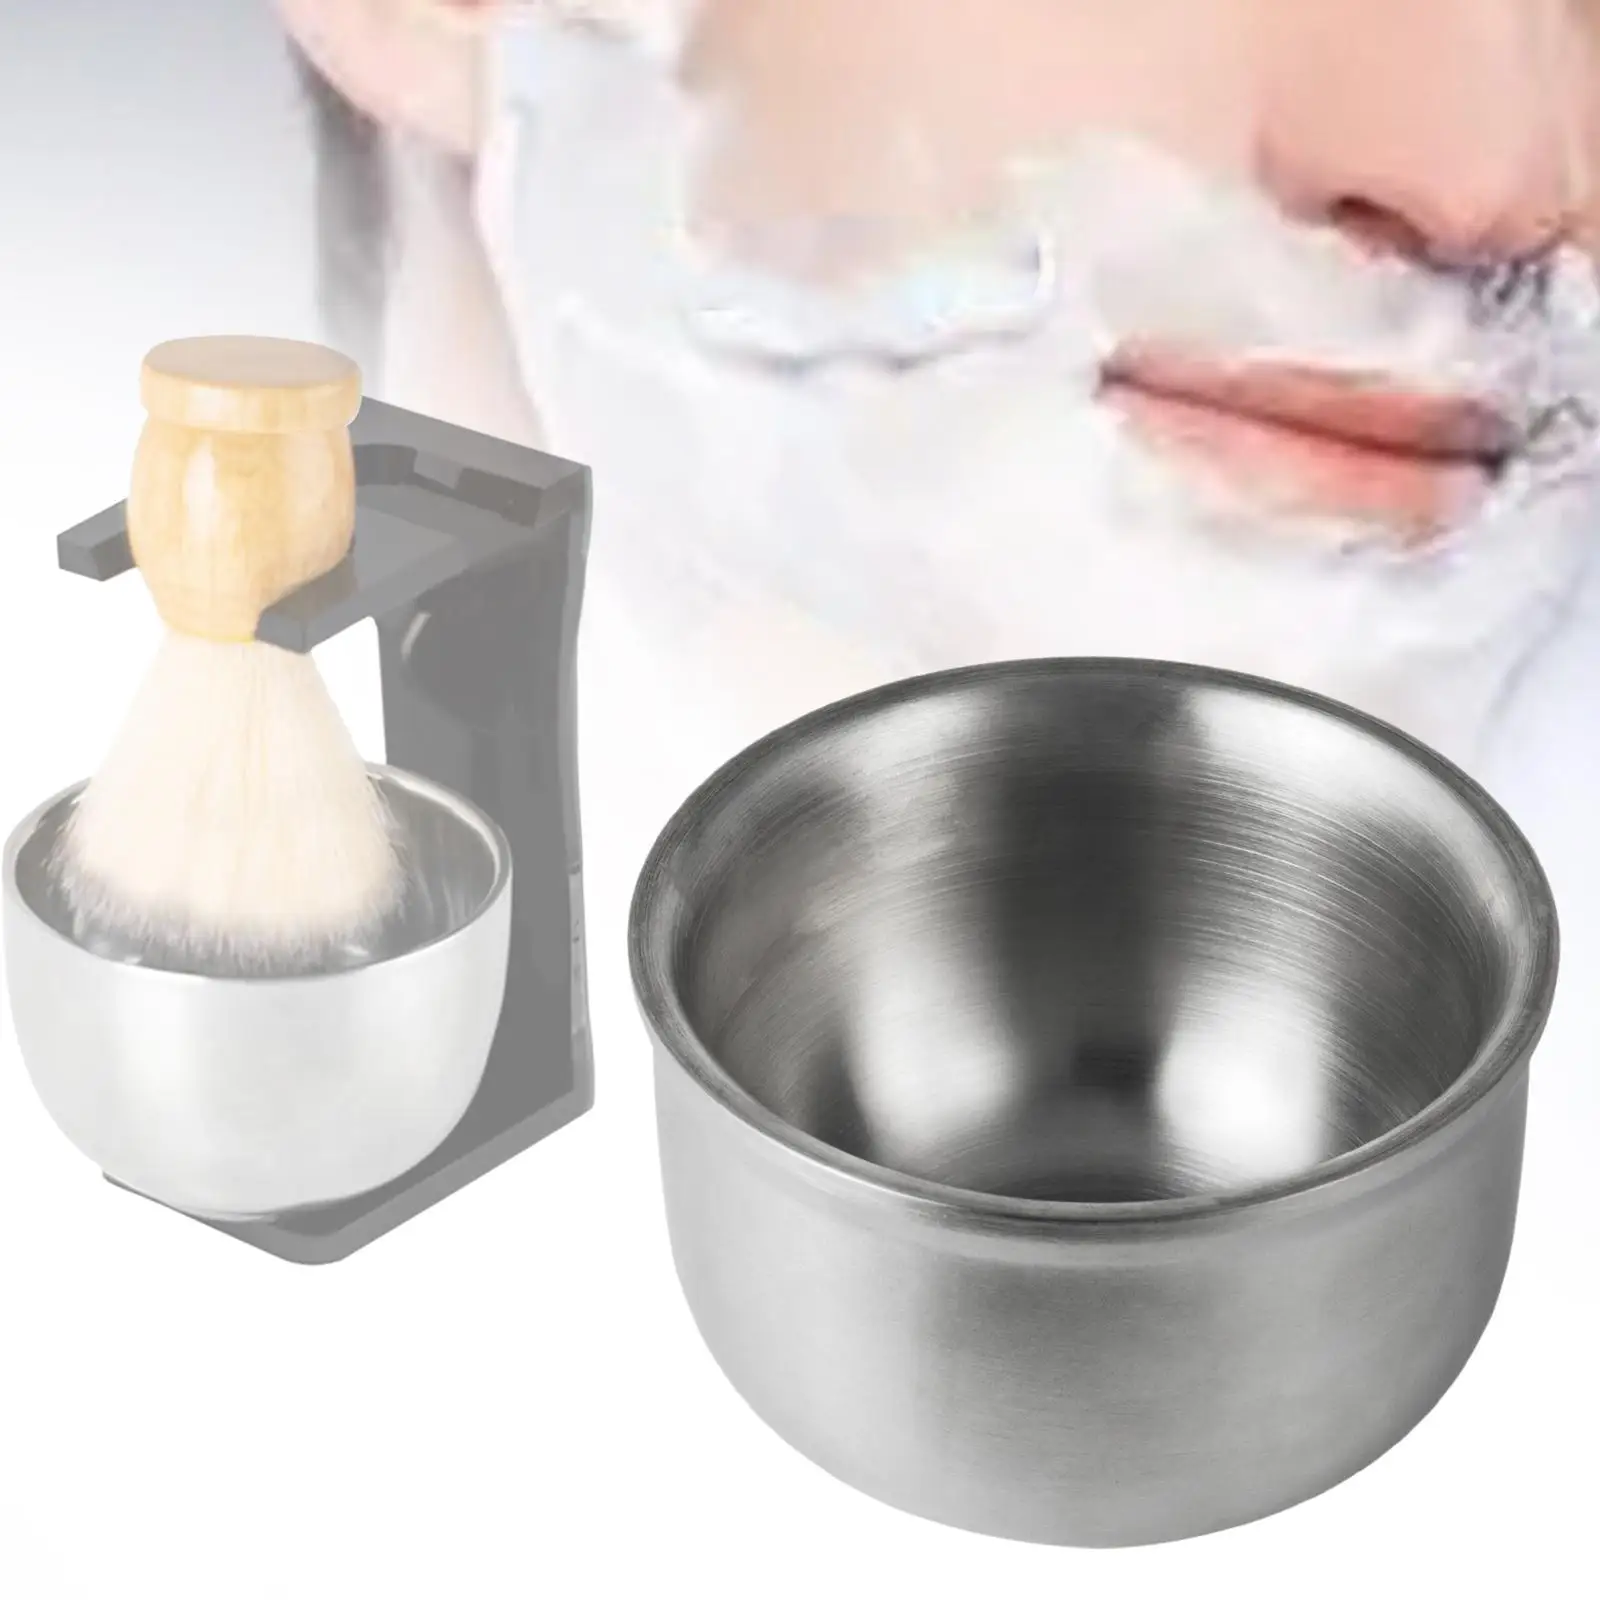 Shaving Bowl Easy to Lather Unbreakable Heat Insulation Durable Fits Wet Shaving Shaving Cup Shave Soap Cup Shaving Mug for Men